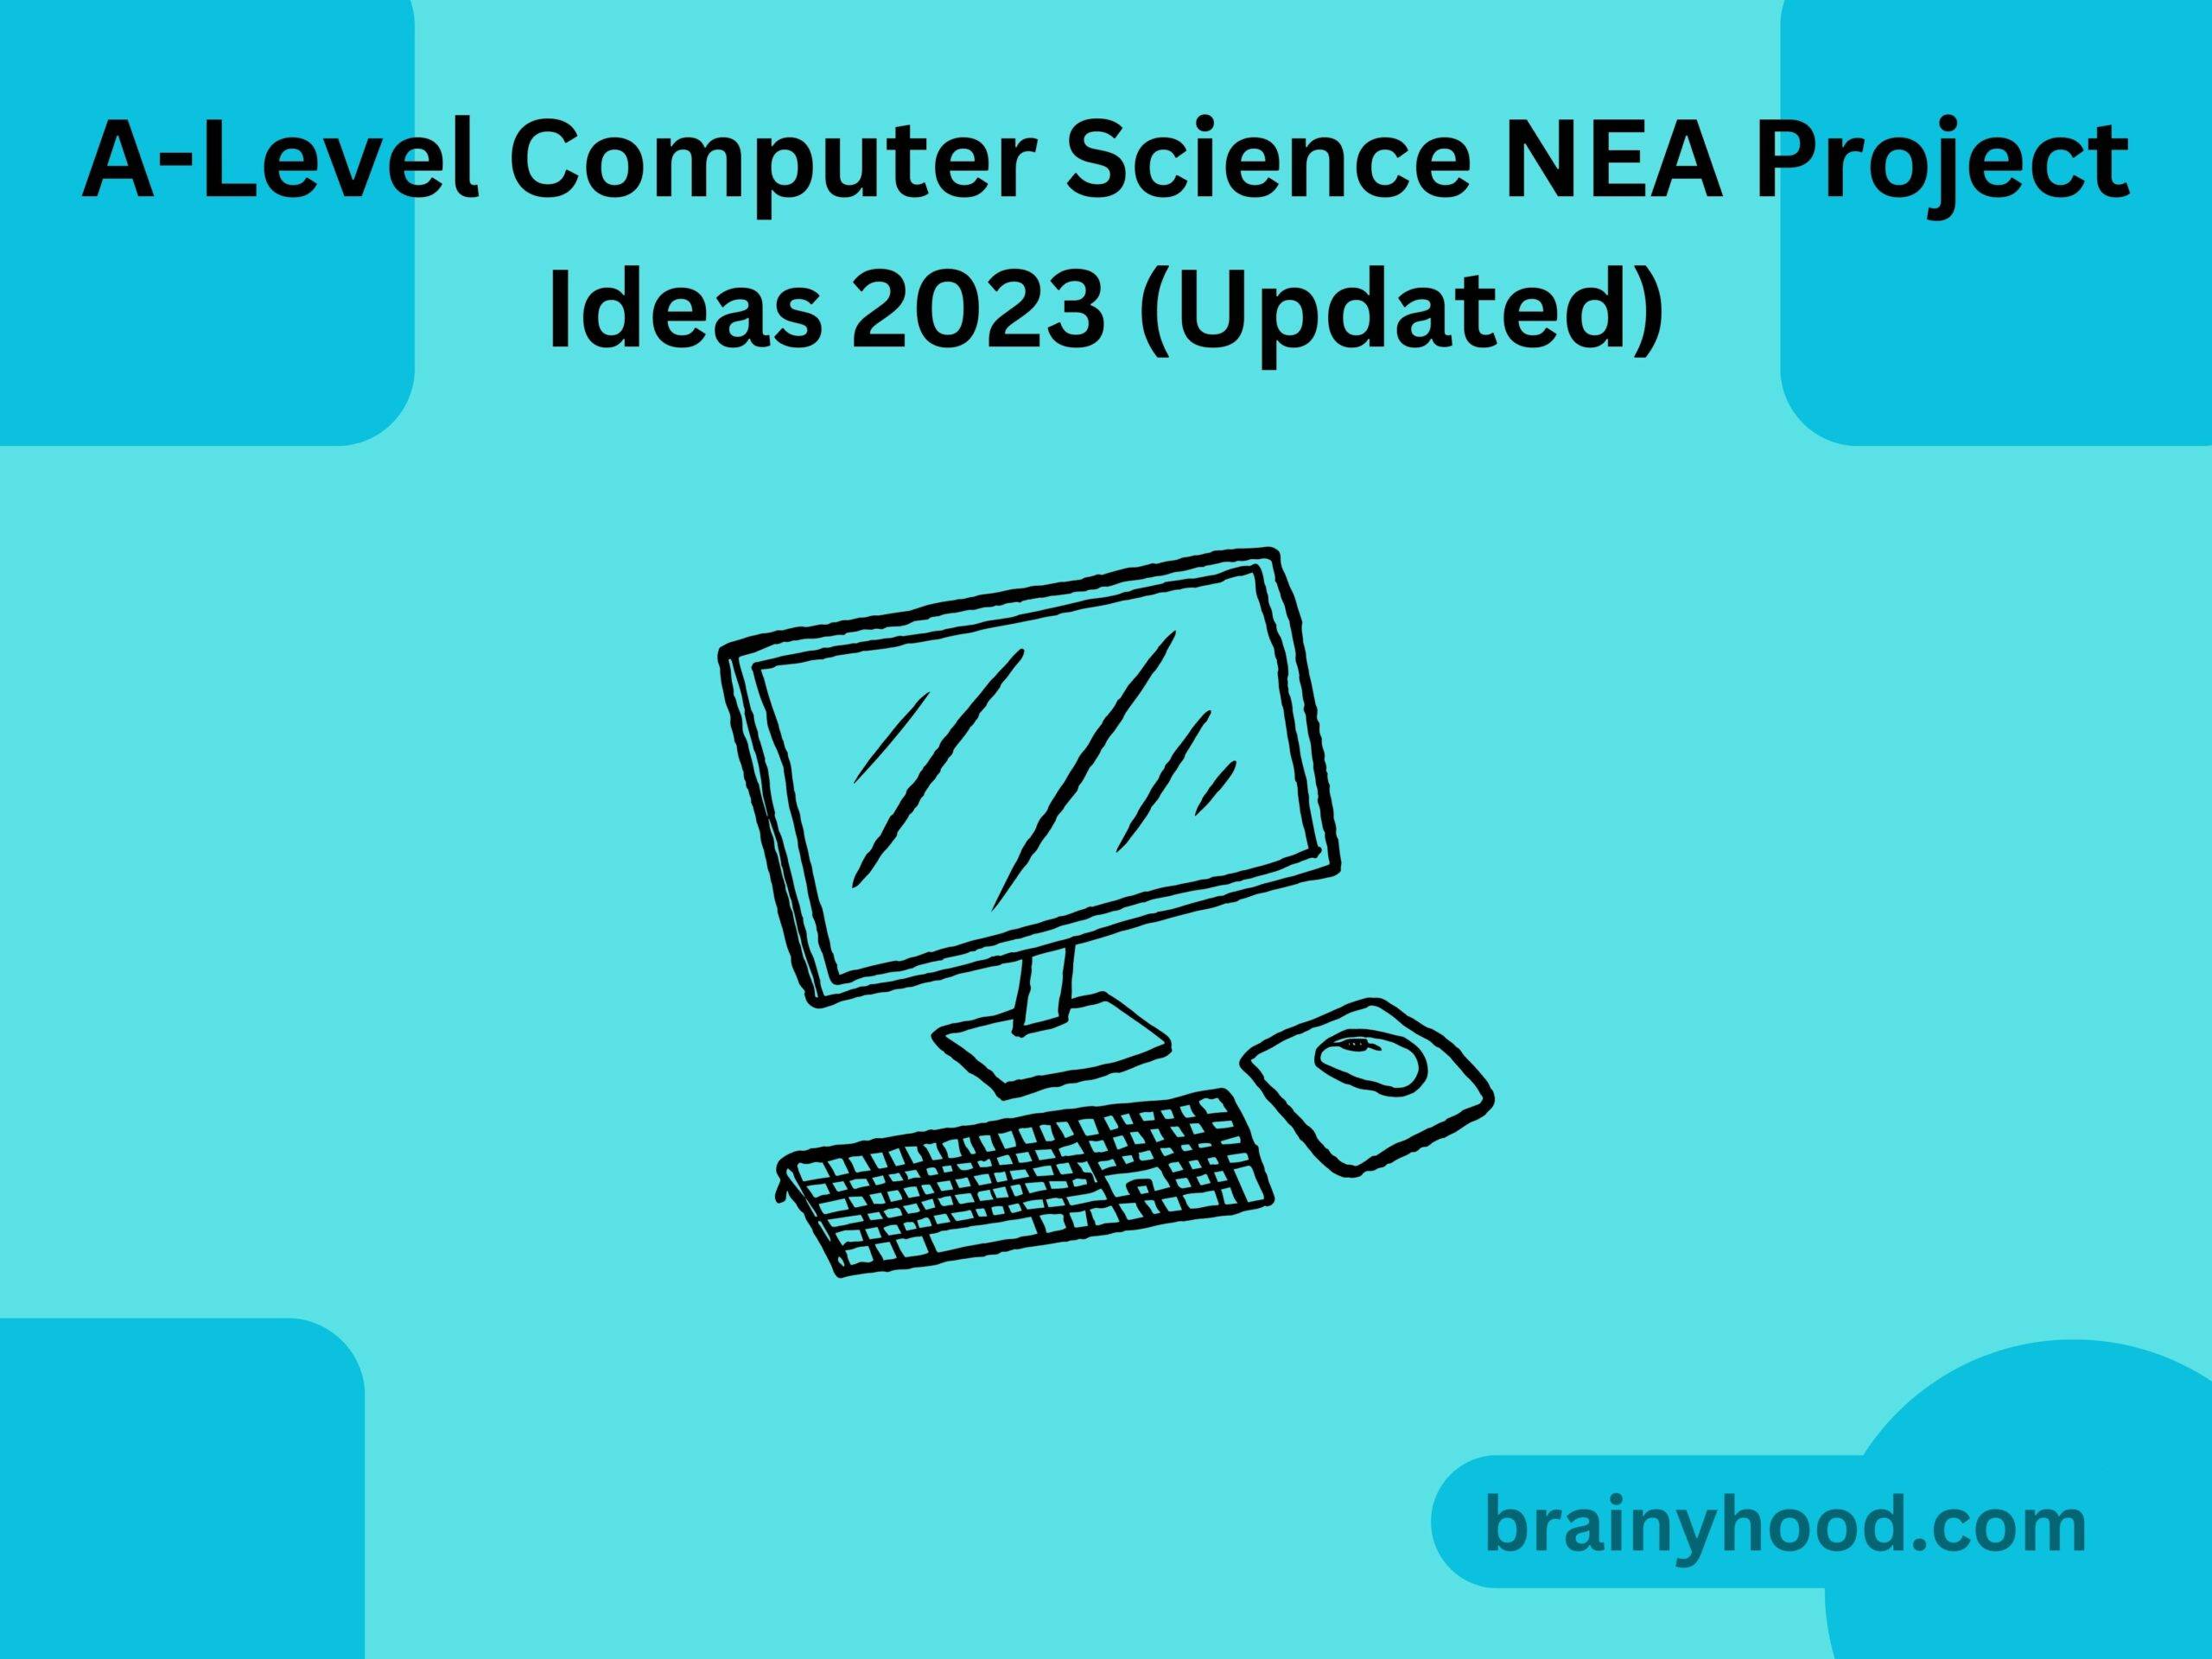 A-Level Computer Science NEA Project Ideas 2023 (Updated)